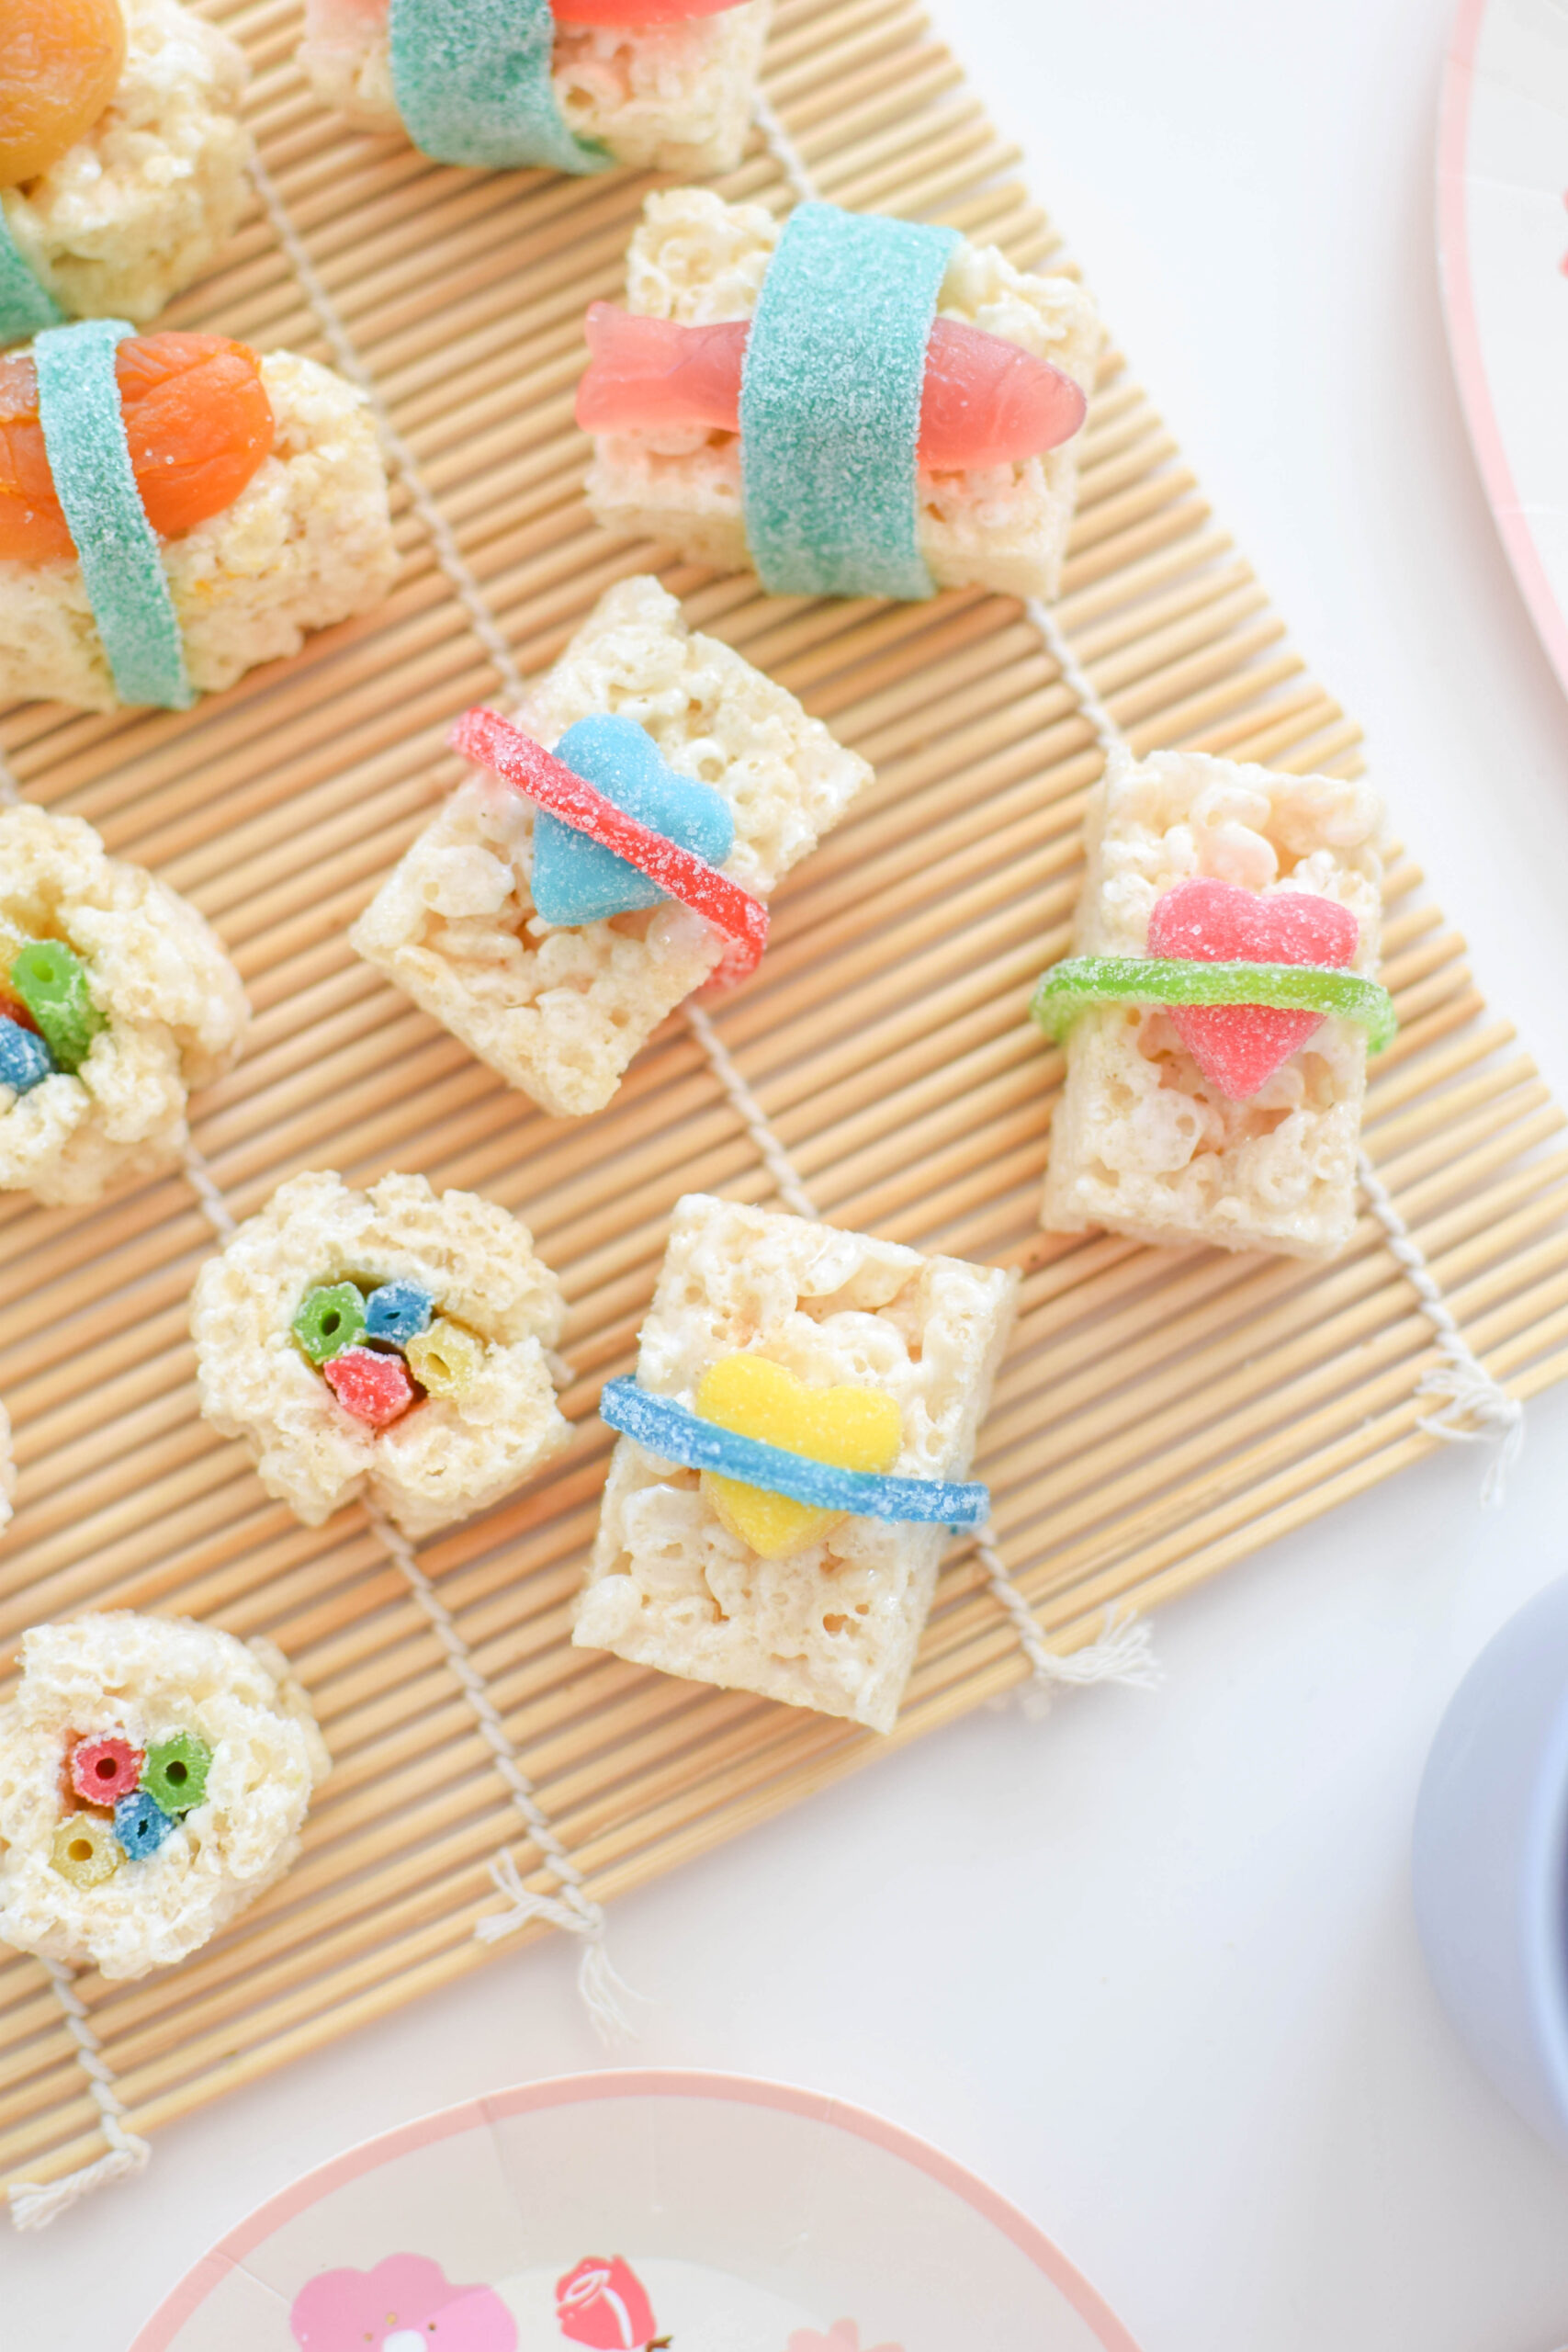 Make Your Own Sushi - Planning With Kids